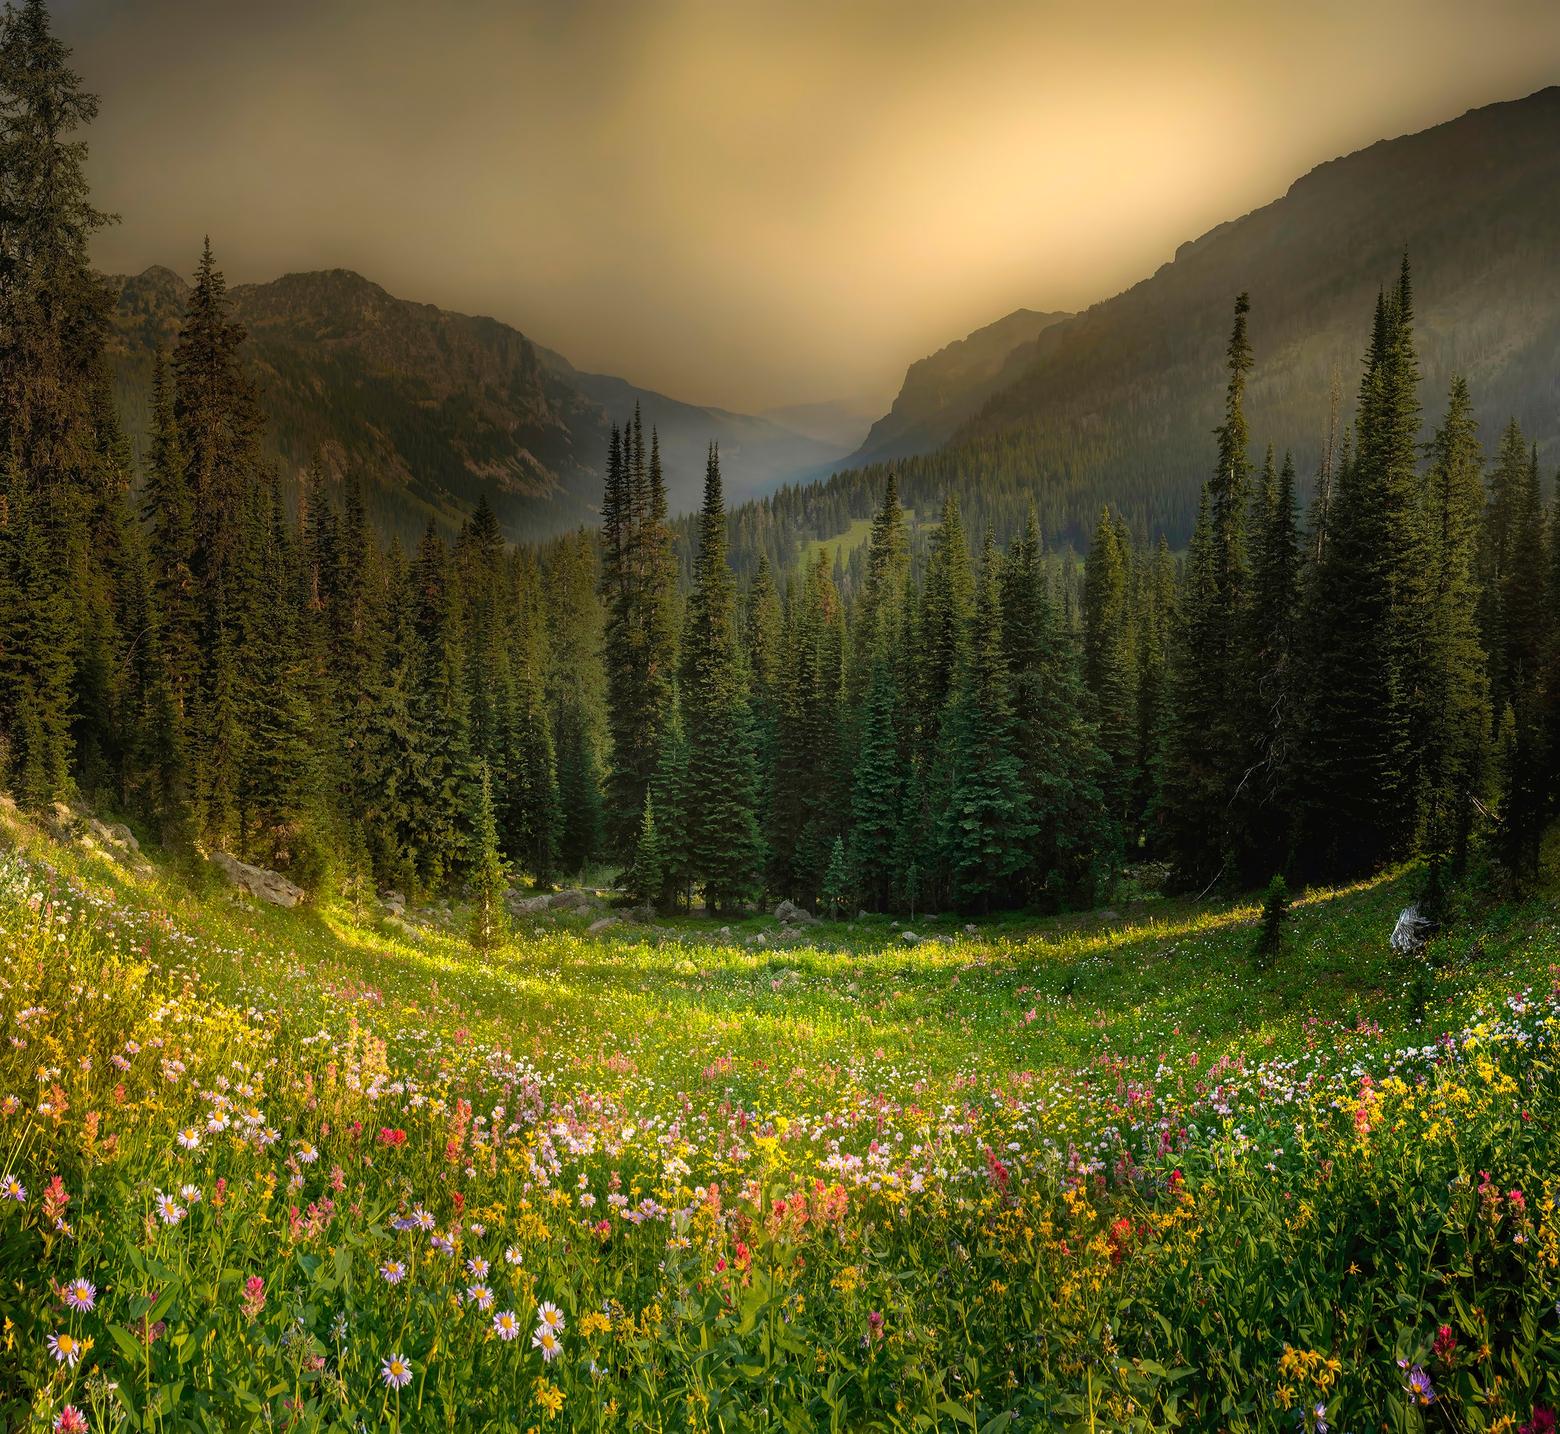 Greater Yellowstone nature photographer Jake Mosher's award-winning image "Paradise Lost."  Used with permission of Mosher